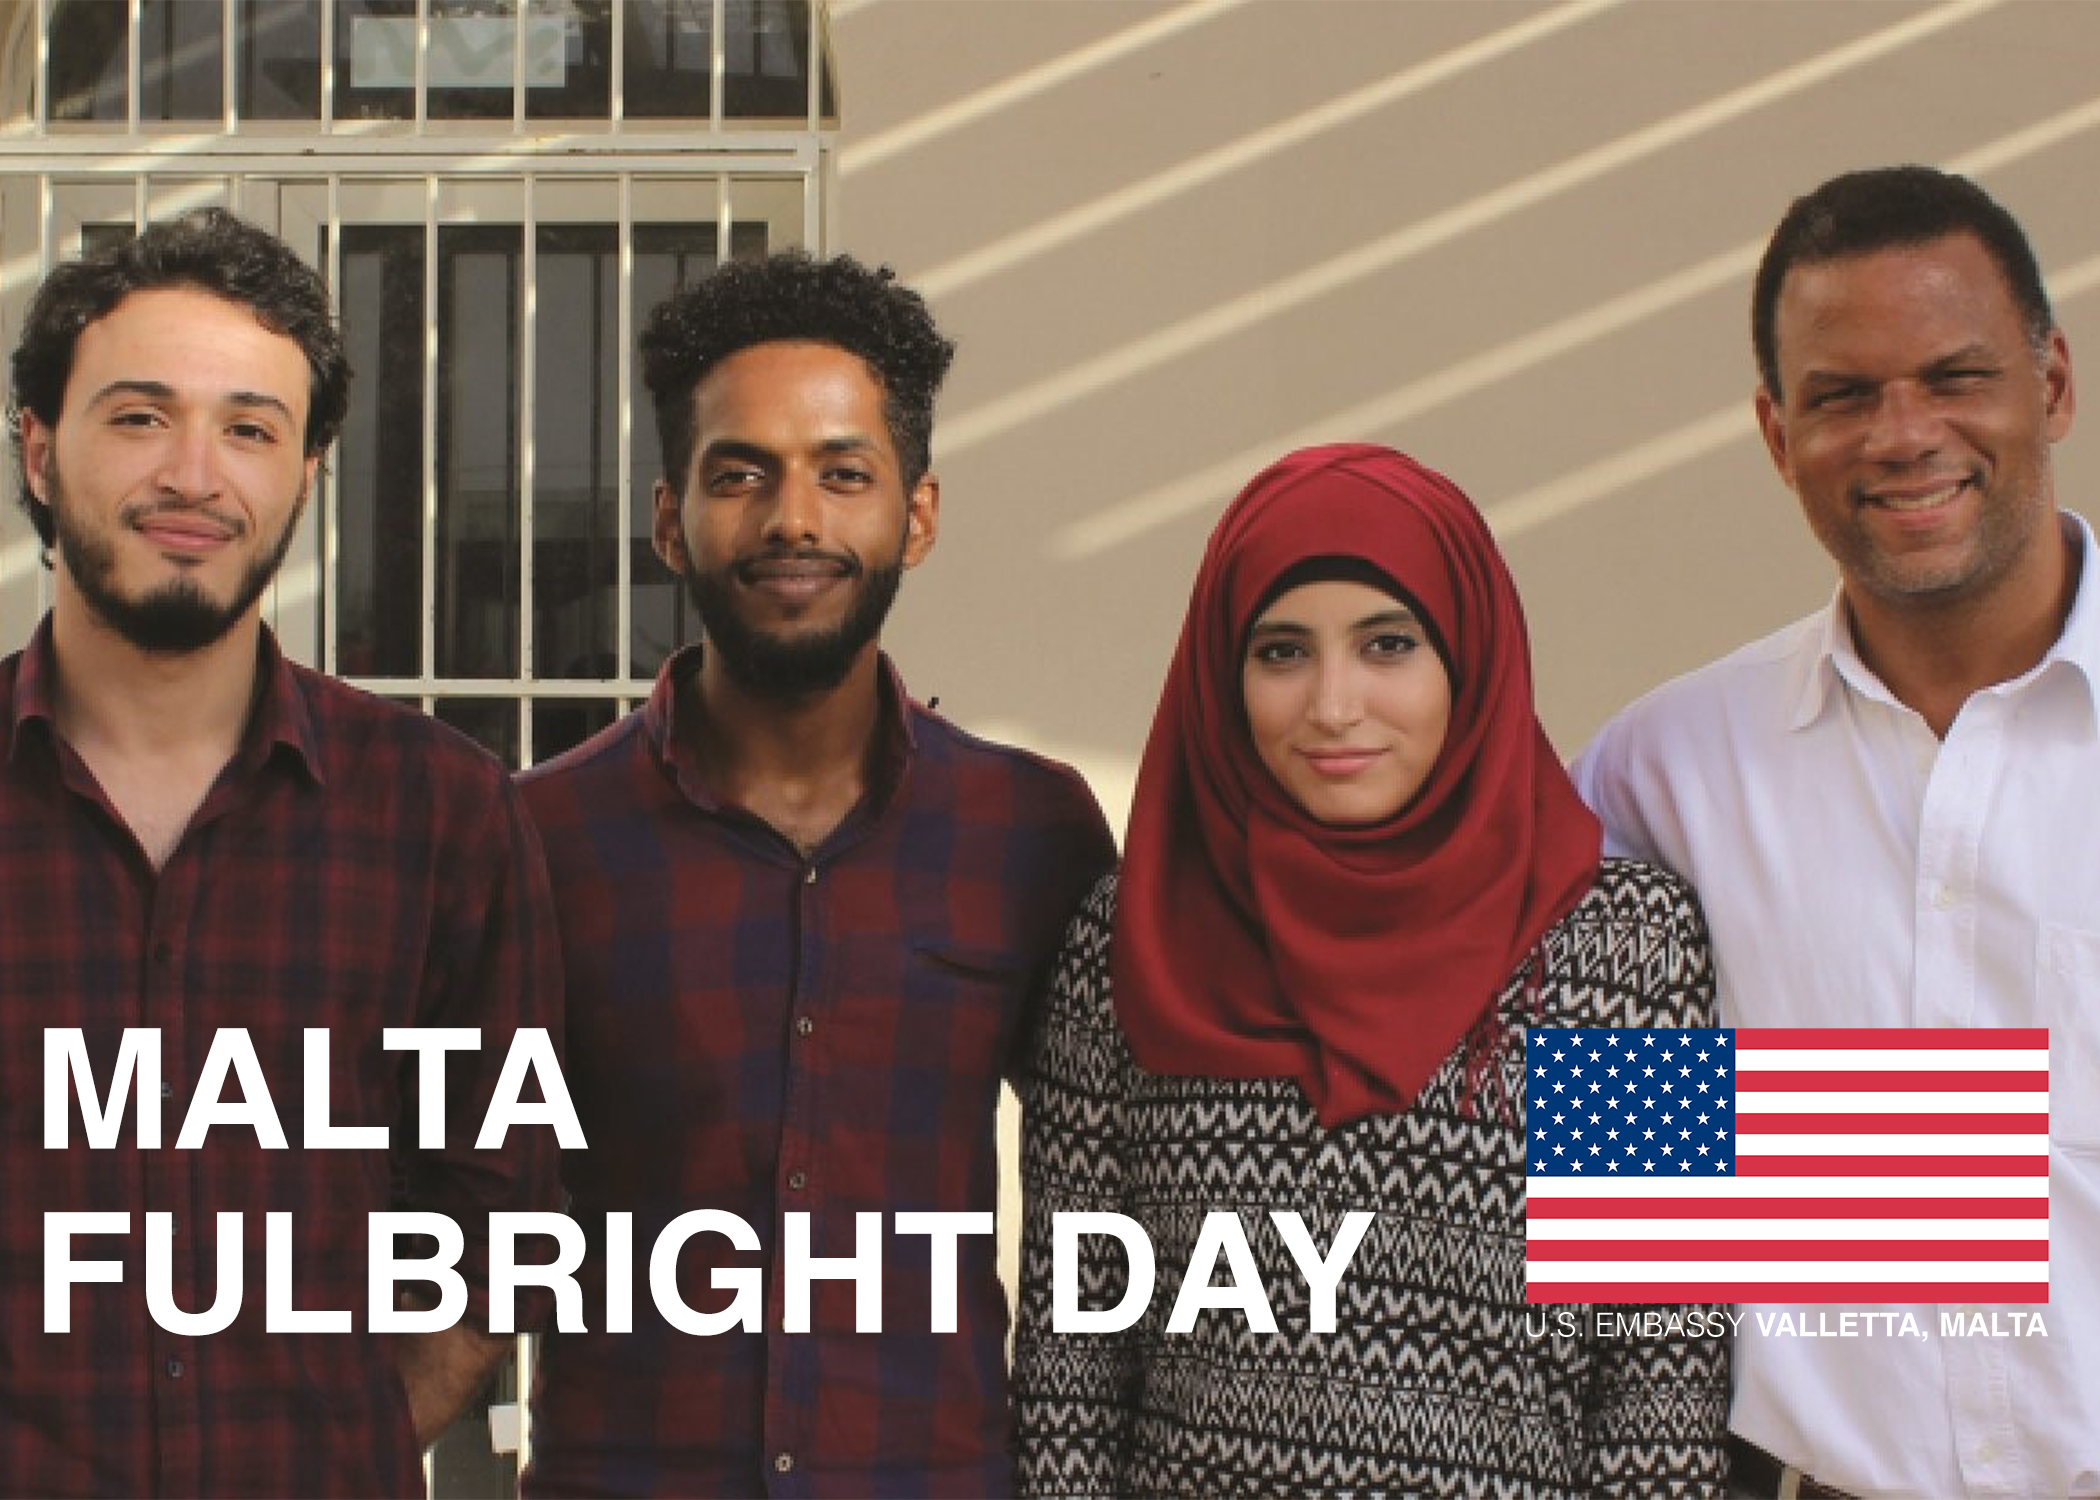 Promotional image for Fulbright Day: Malta with a photo of four people, three men and one woman in hijab, and the U.S. flag